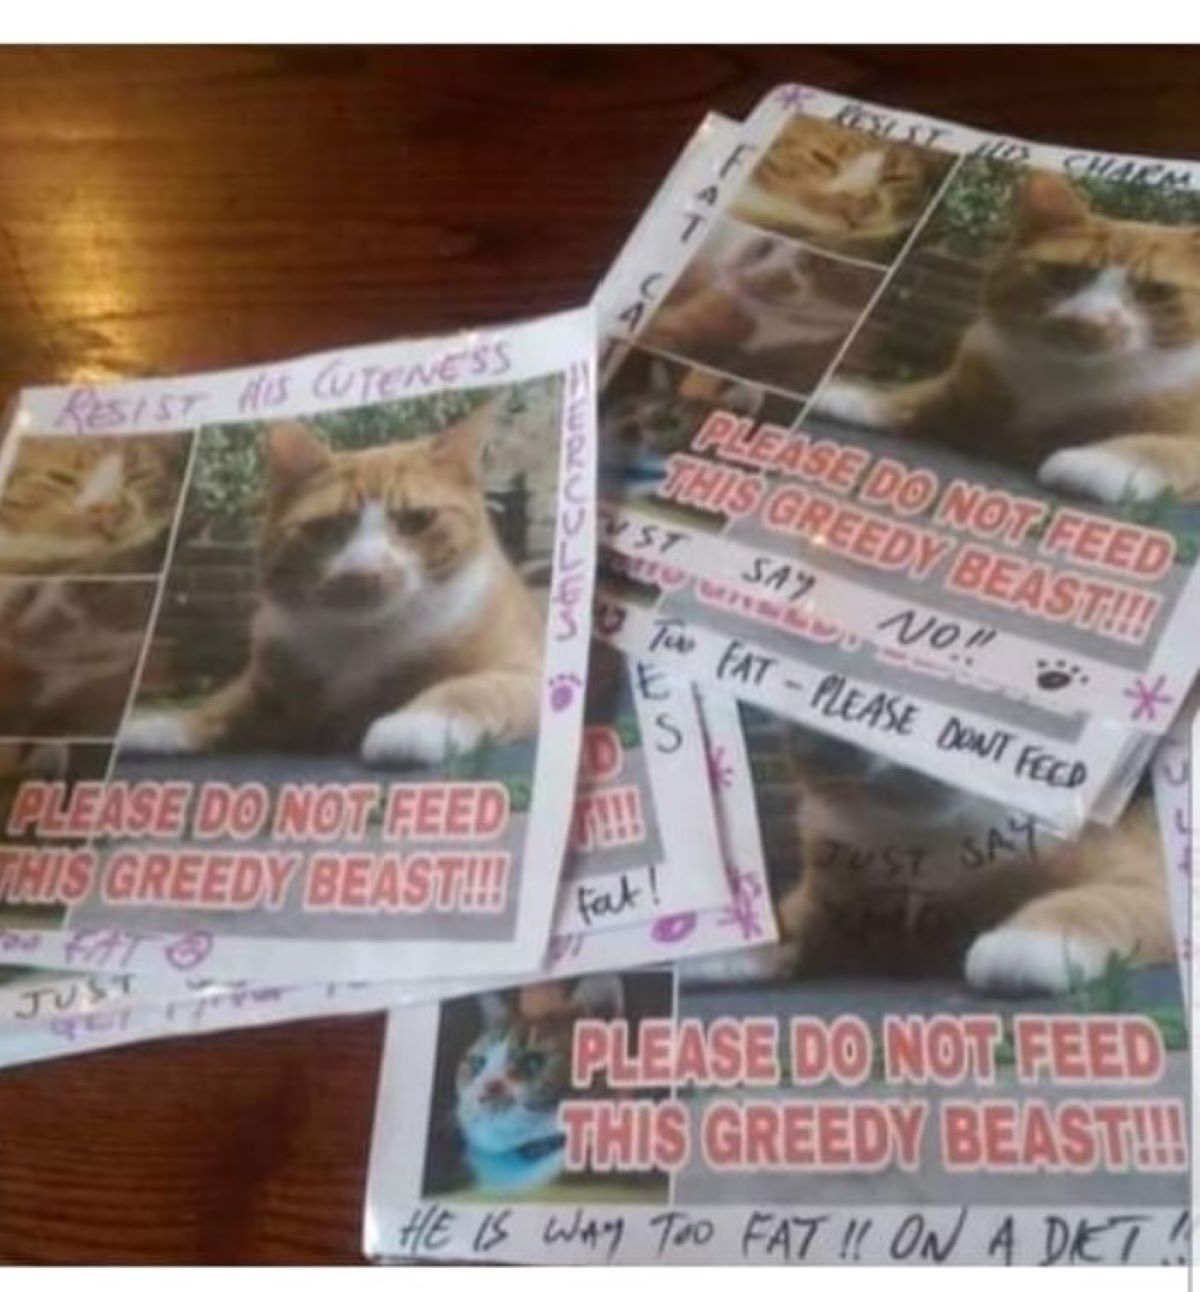 photos of posters with a cat's image on them.